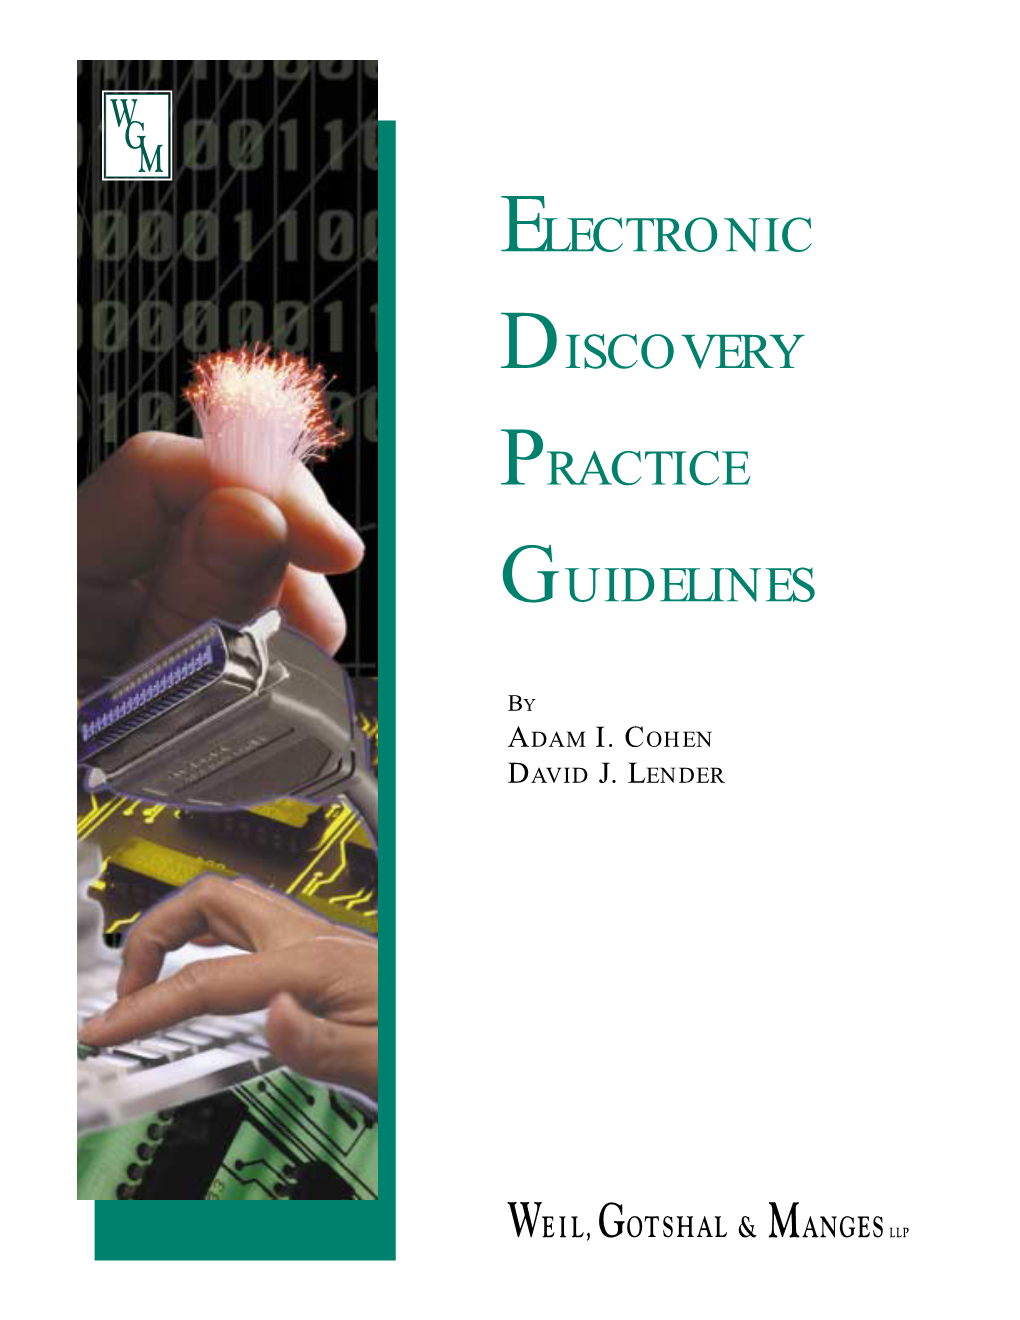 Electronic Discovery Practice Guidelines